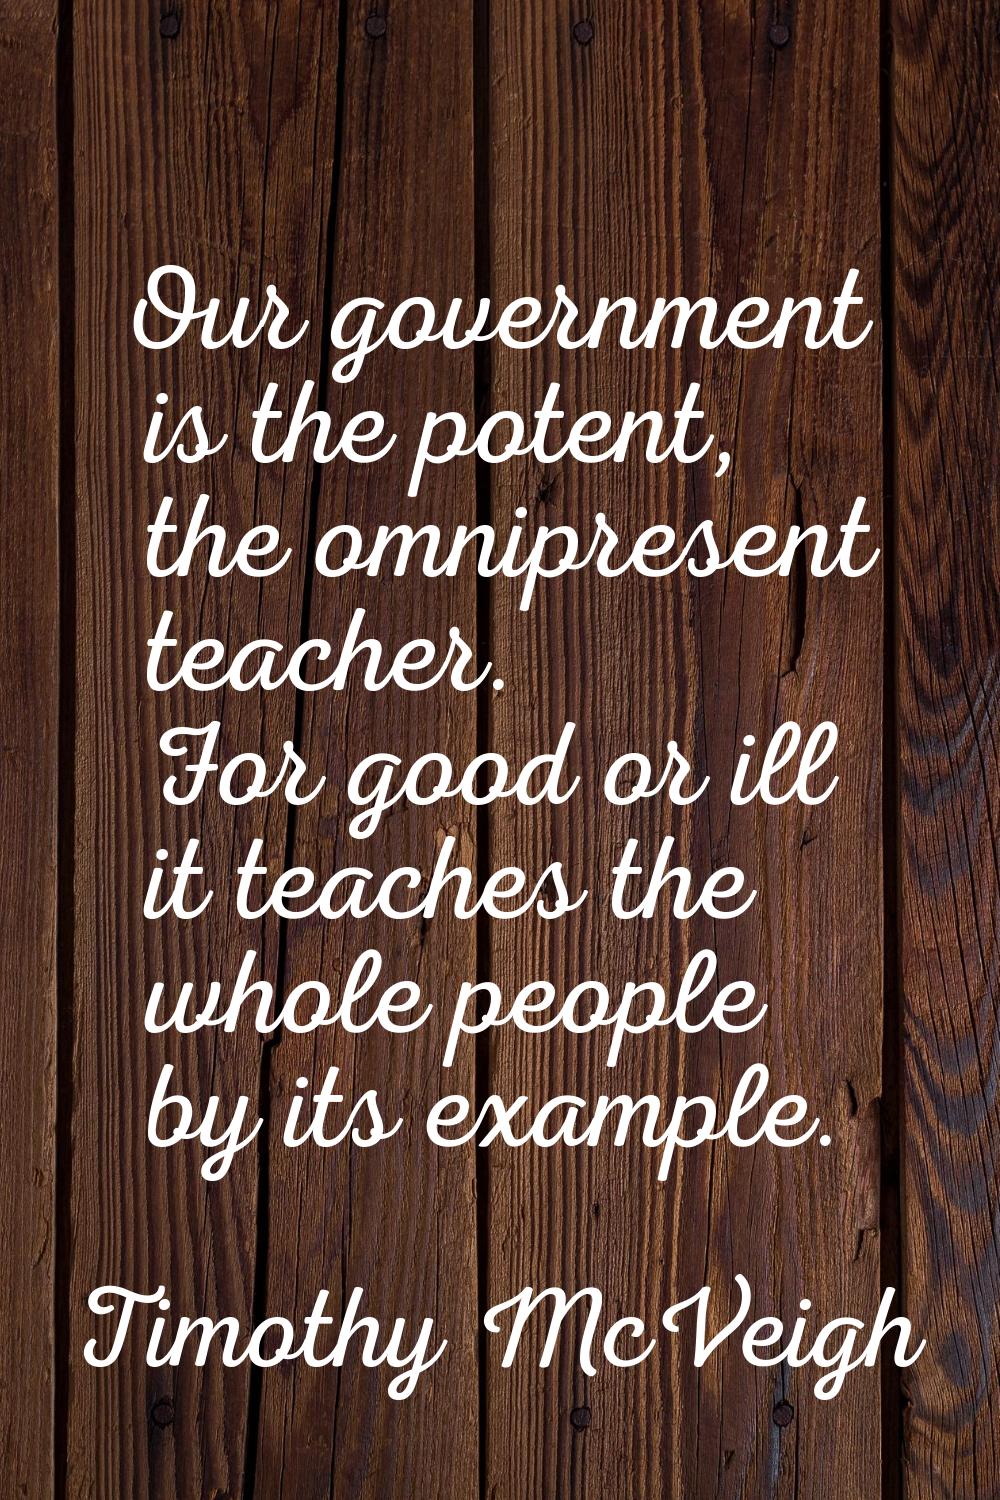 Our government is the potent, the omnipresent teacher. For good or ill it teaches the whole people 